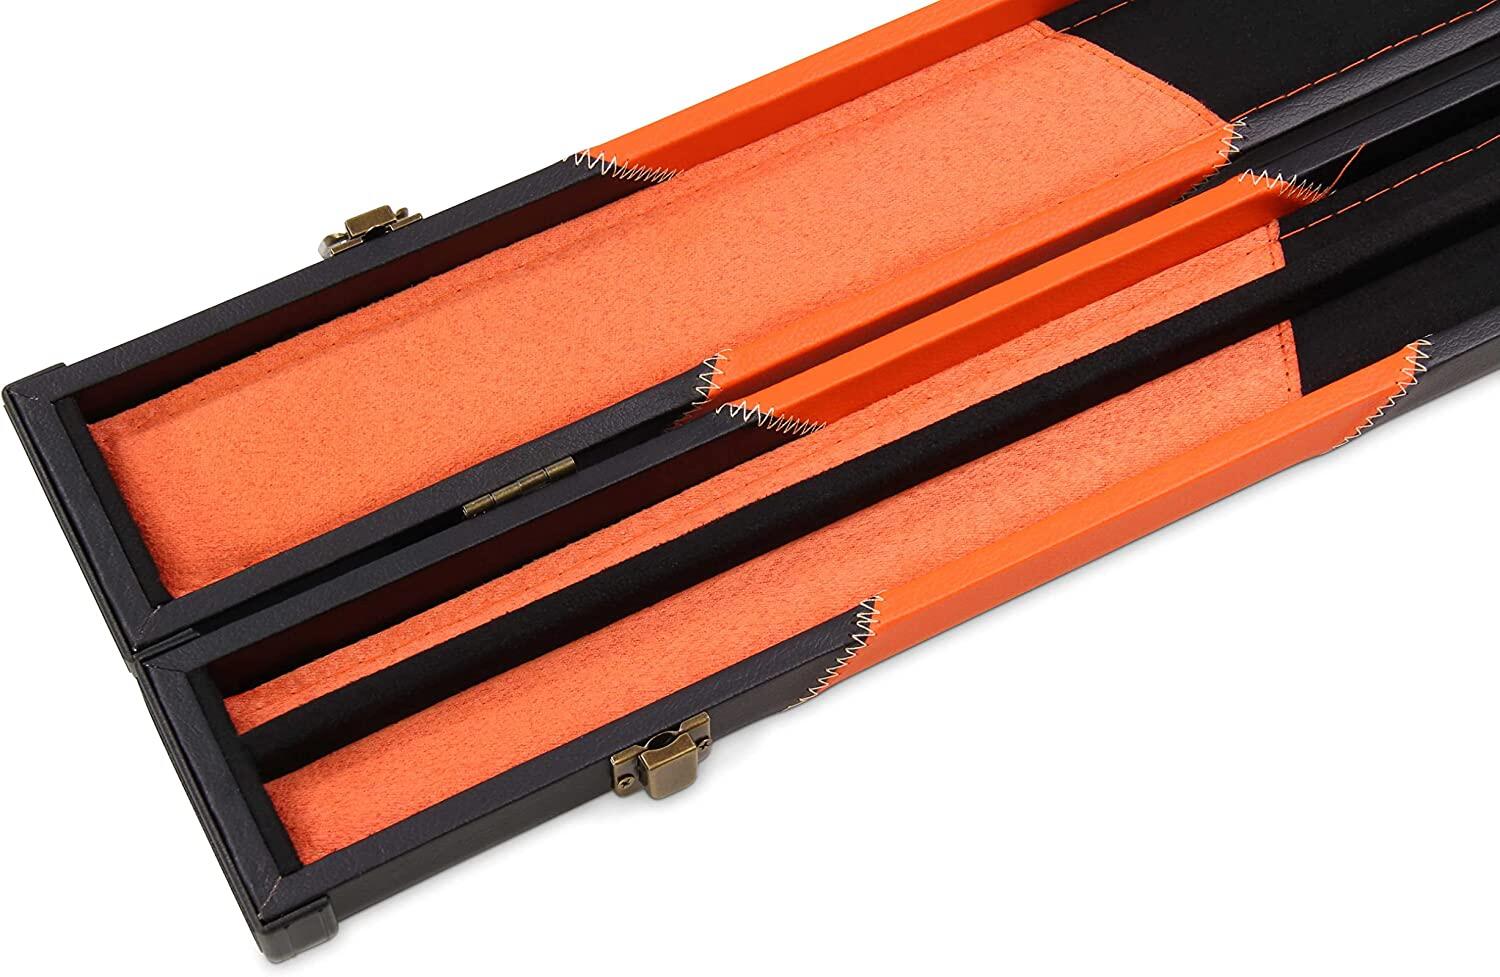 Baize Master ORANGE ARROW 2pc Deluxe Snooker Pool Cue Case with Matching Interi 7/7